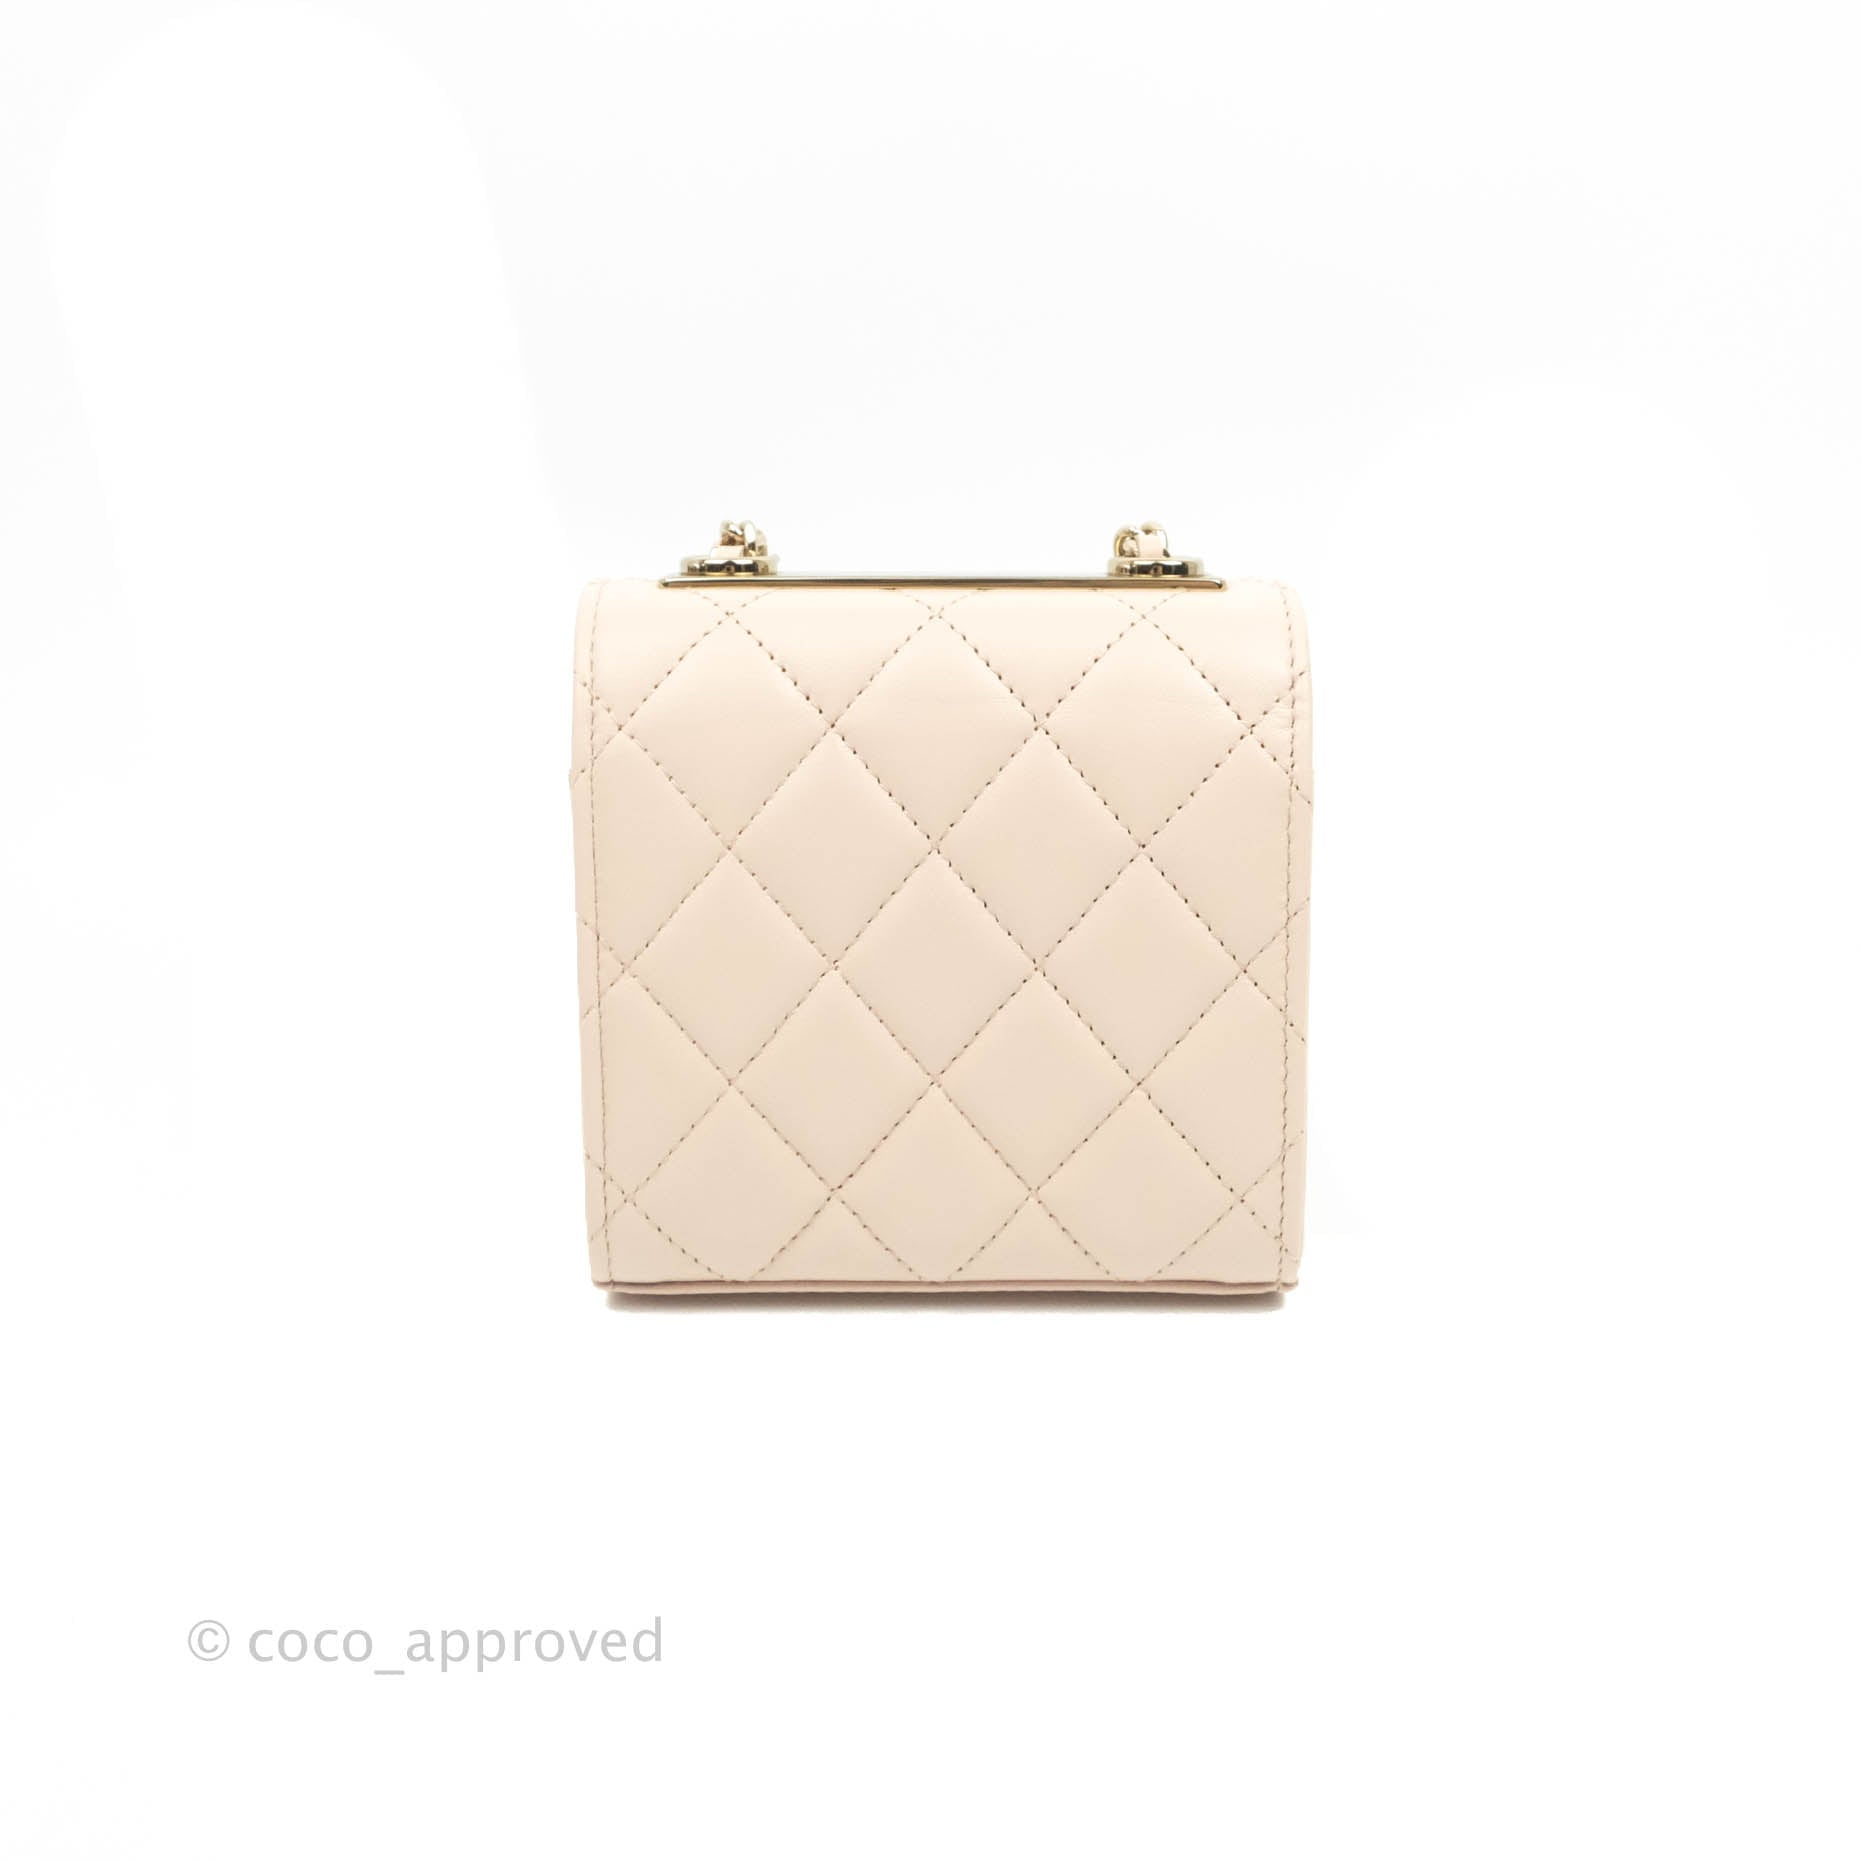 chanel quilted hobo bag leather